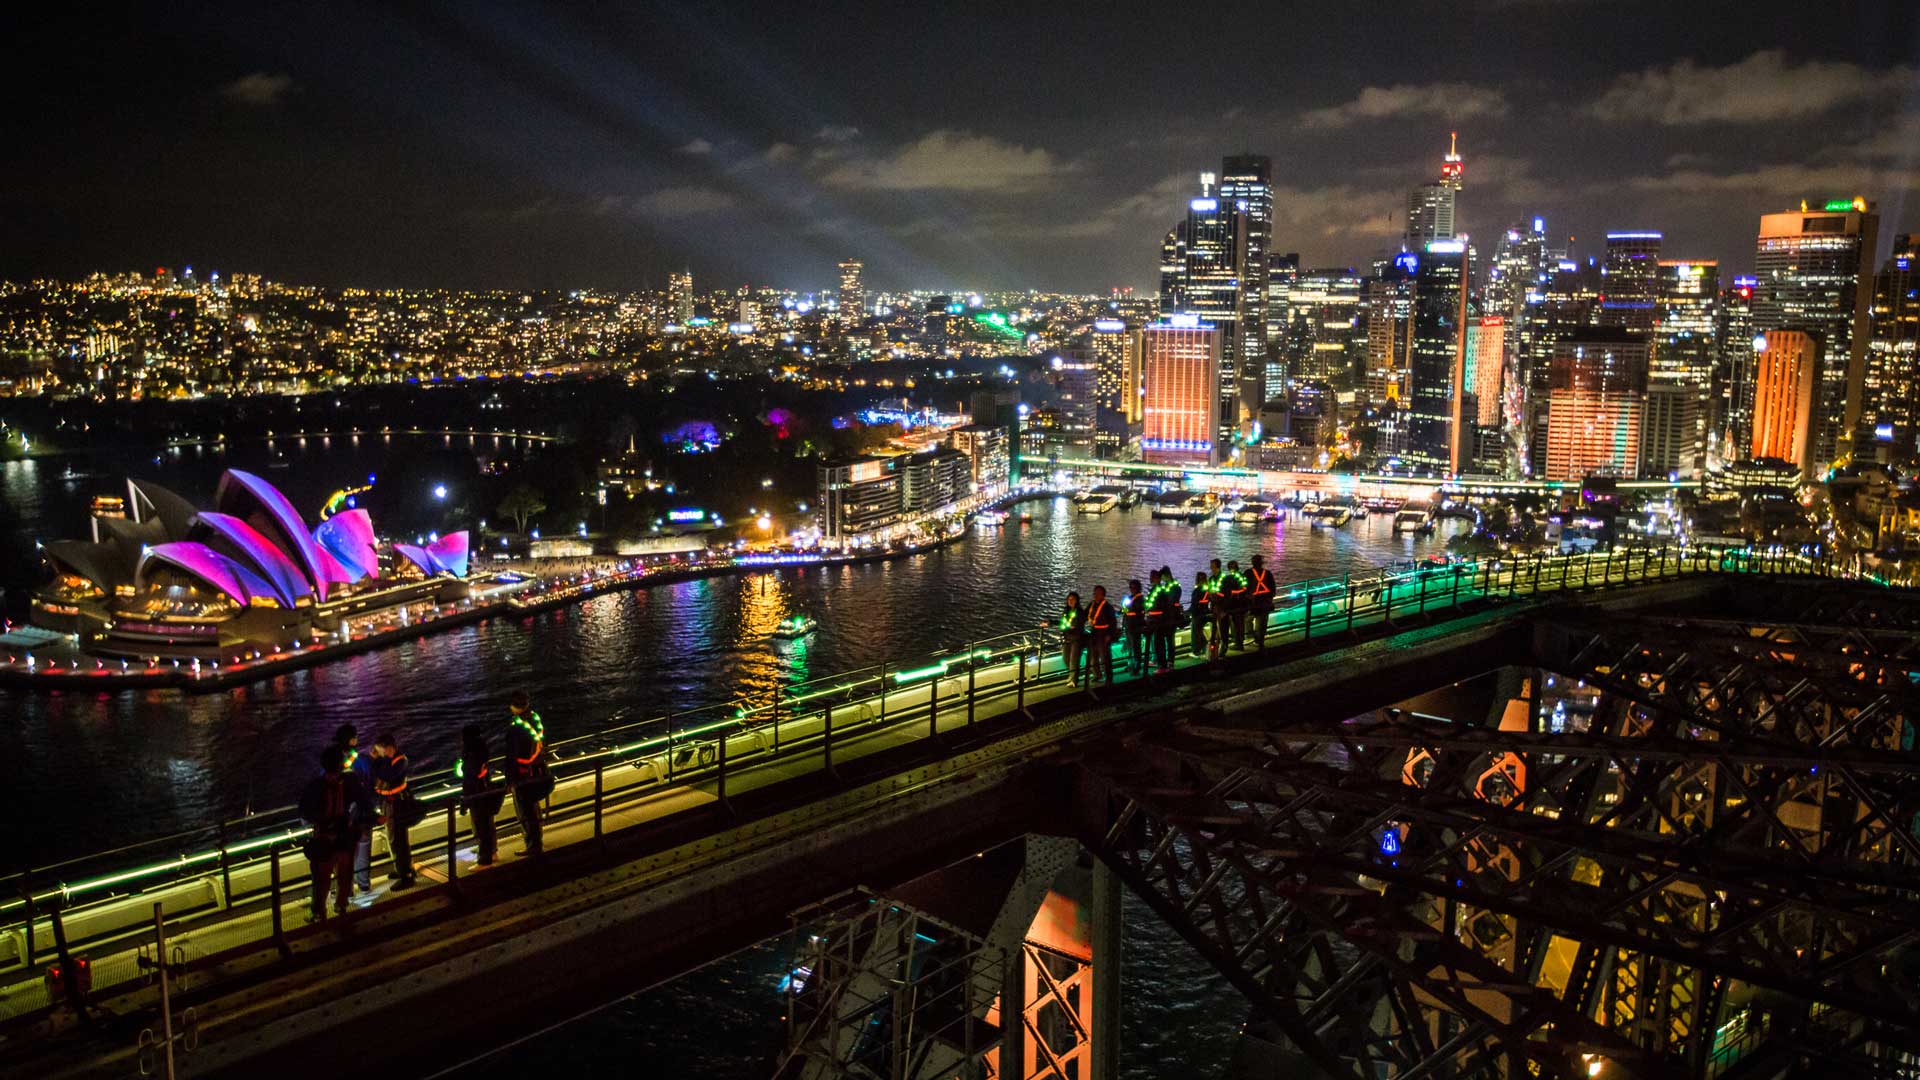 How to See the Most Popular Vivid 2019 Installations Without Fighting the Masses